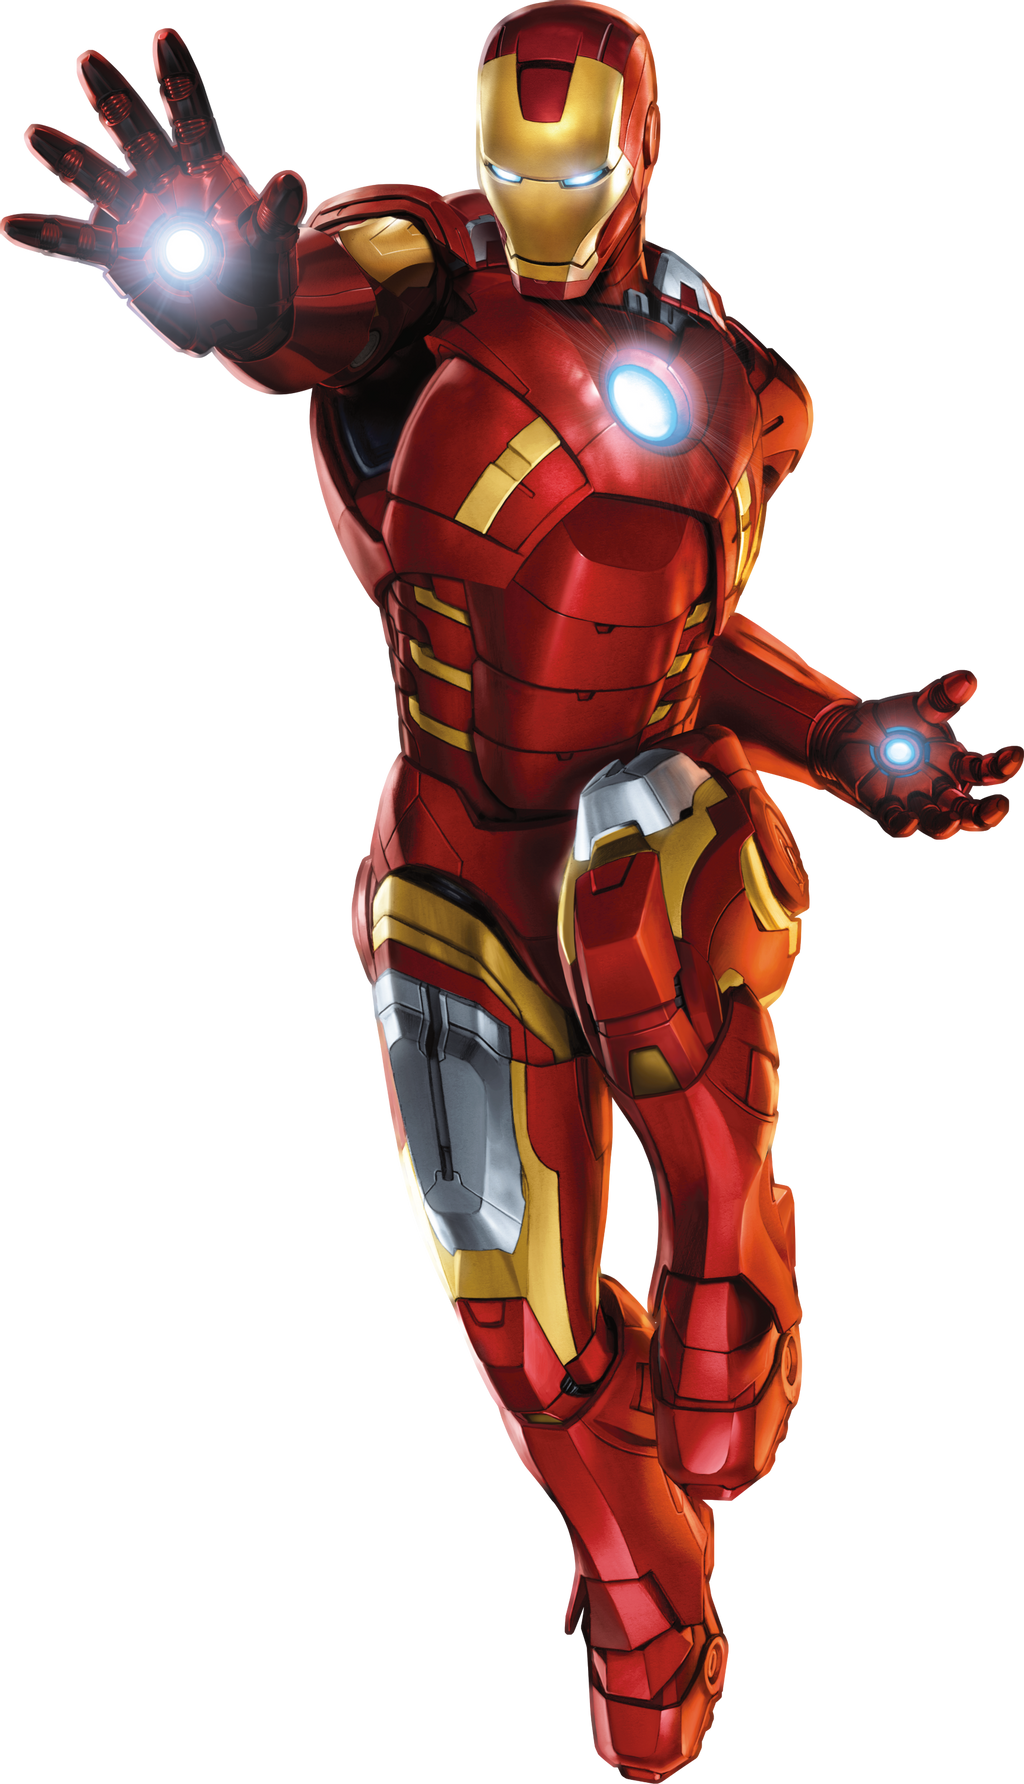 Avengers Flying Iron Man PNG Transparant Beeld